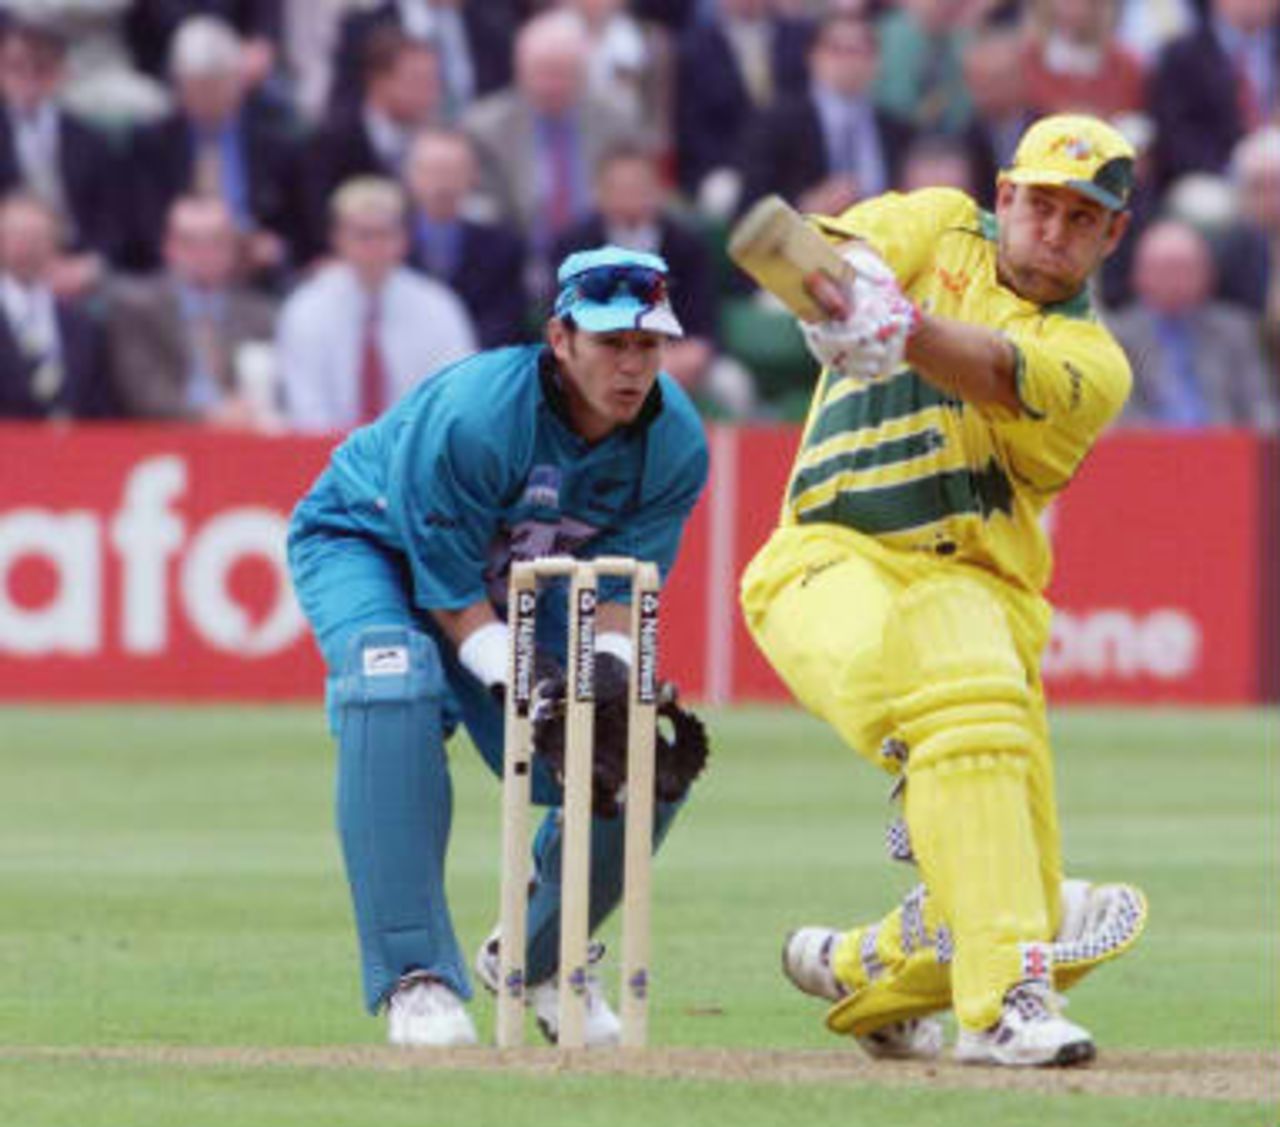 Australia's Darren Lehmann (R) blasts a shot off the bowling of New Zealand's Chris Harris 20 May 1999, during their Cricket World Cup match in Cardiff.